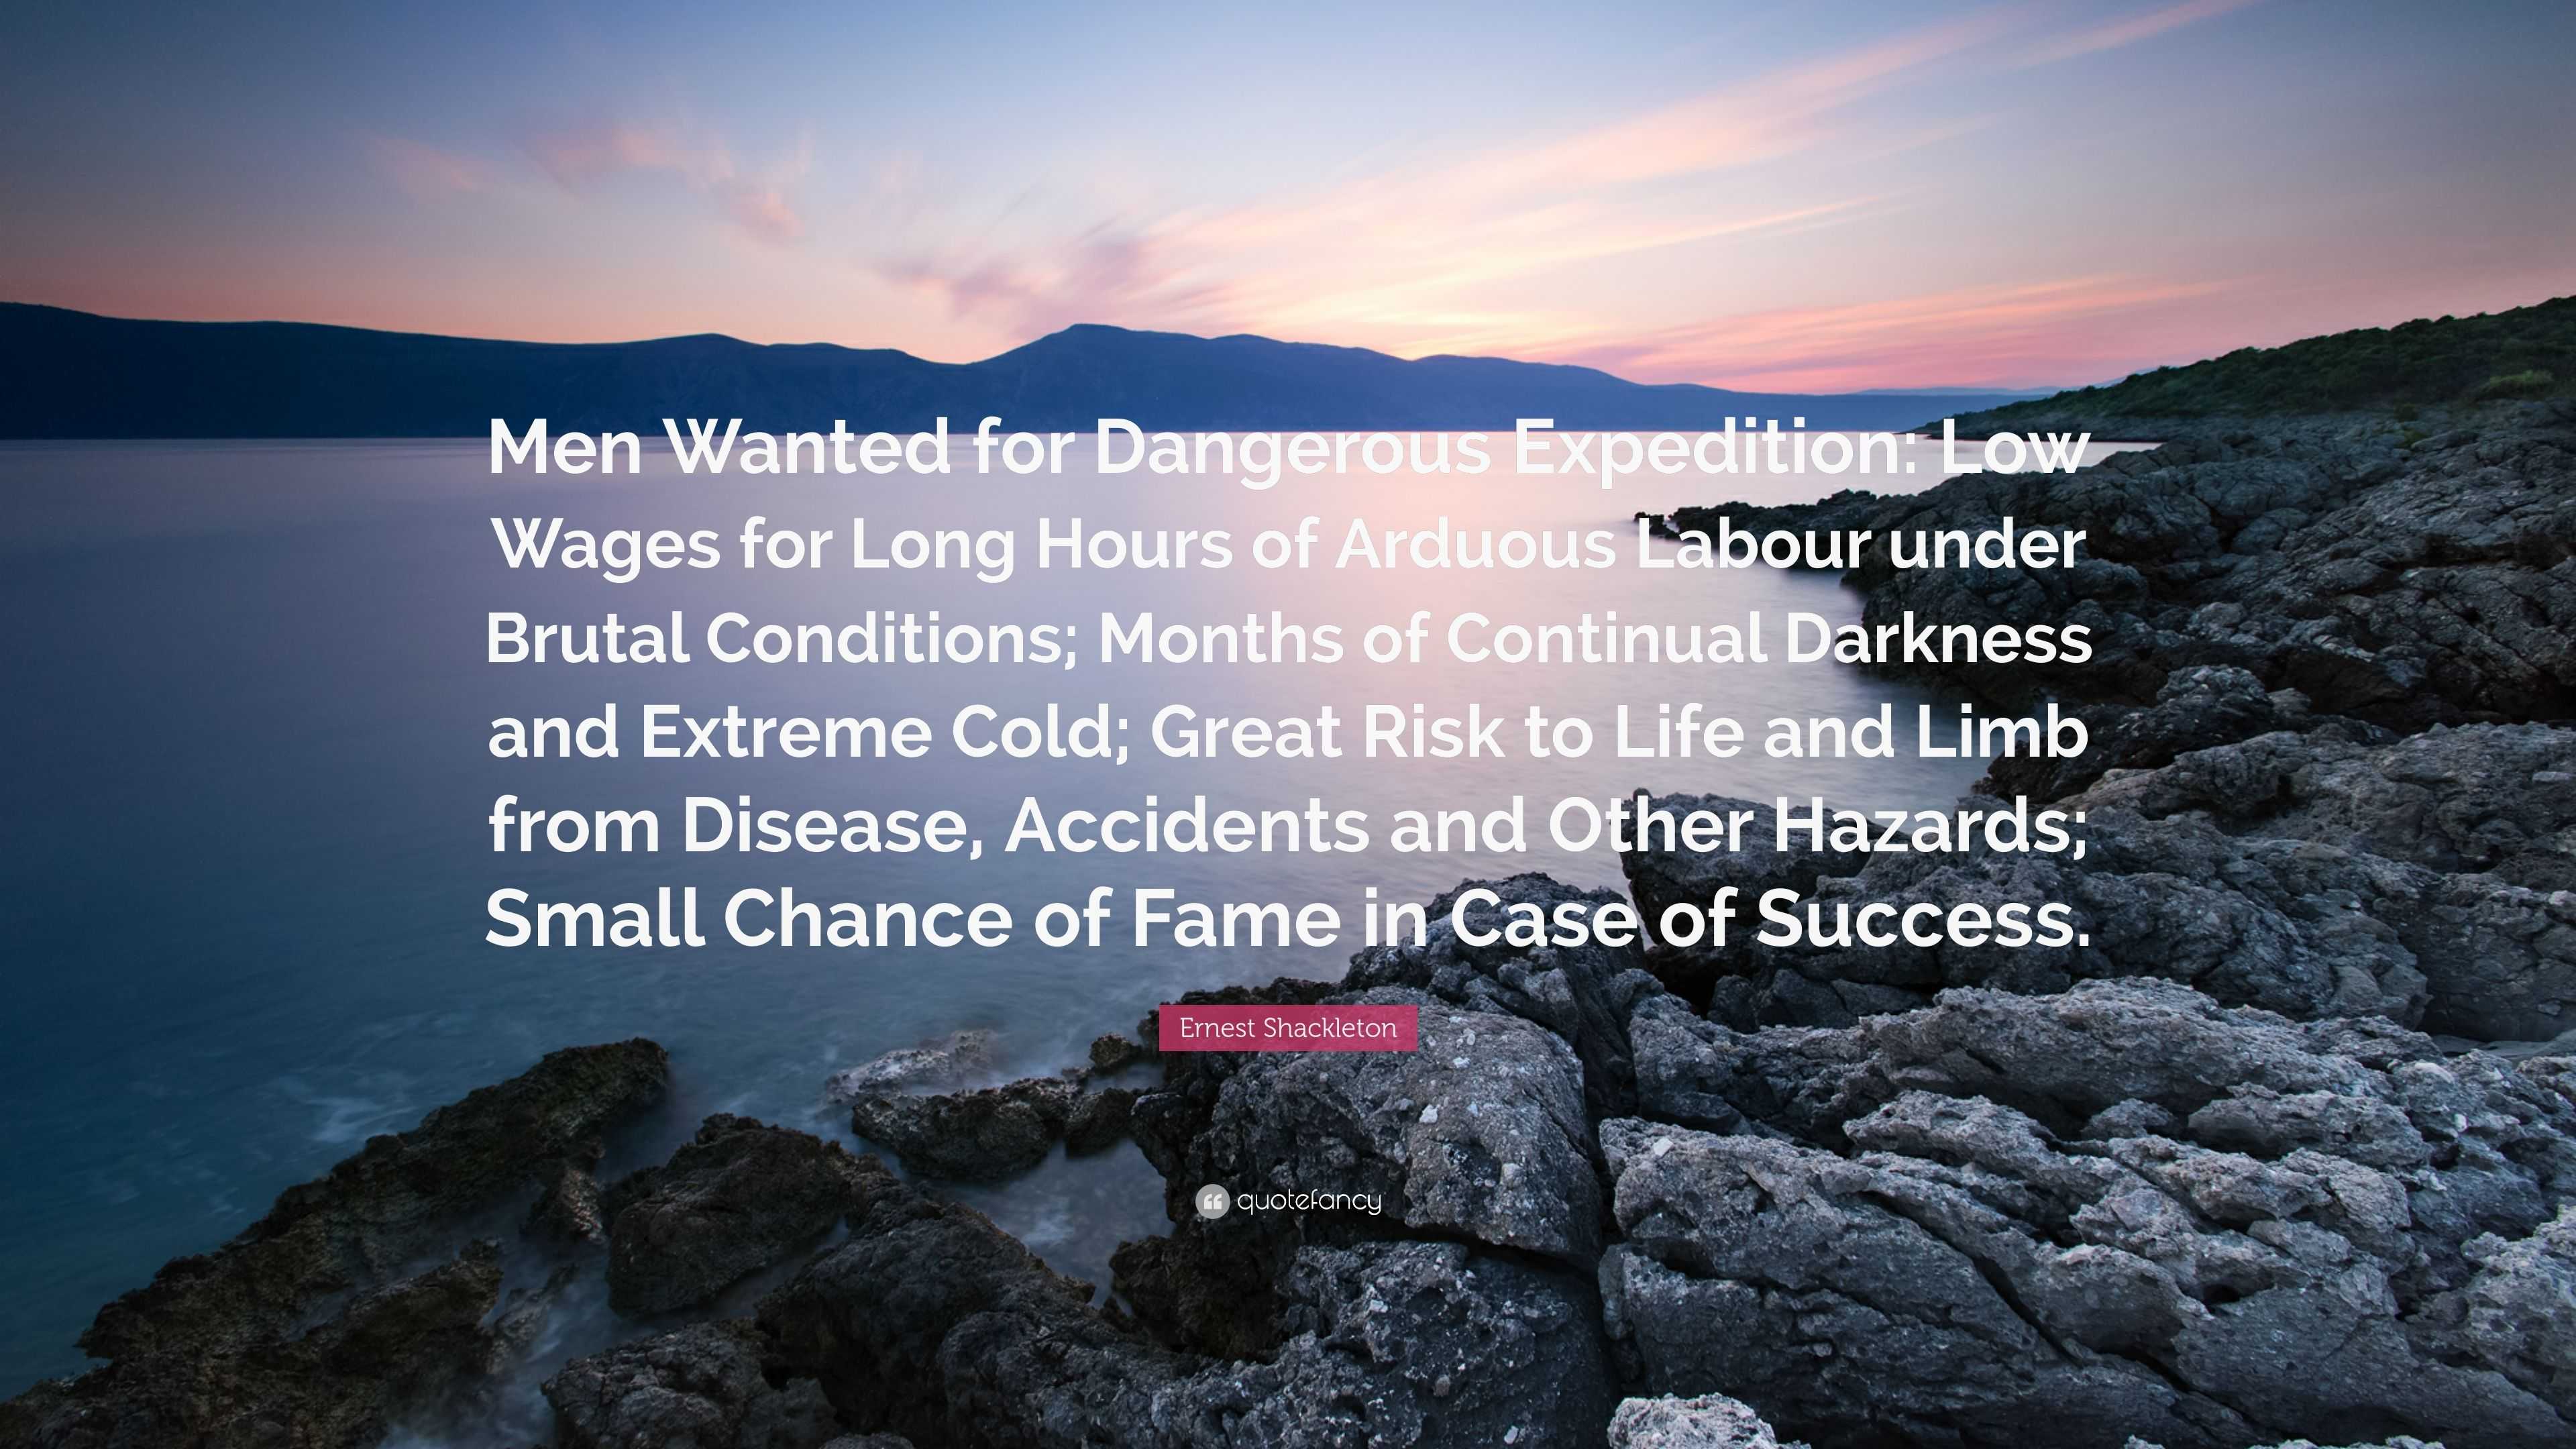 Ernest Shackleton Quote: “Men Wanted for Dangerous Expedition: Low